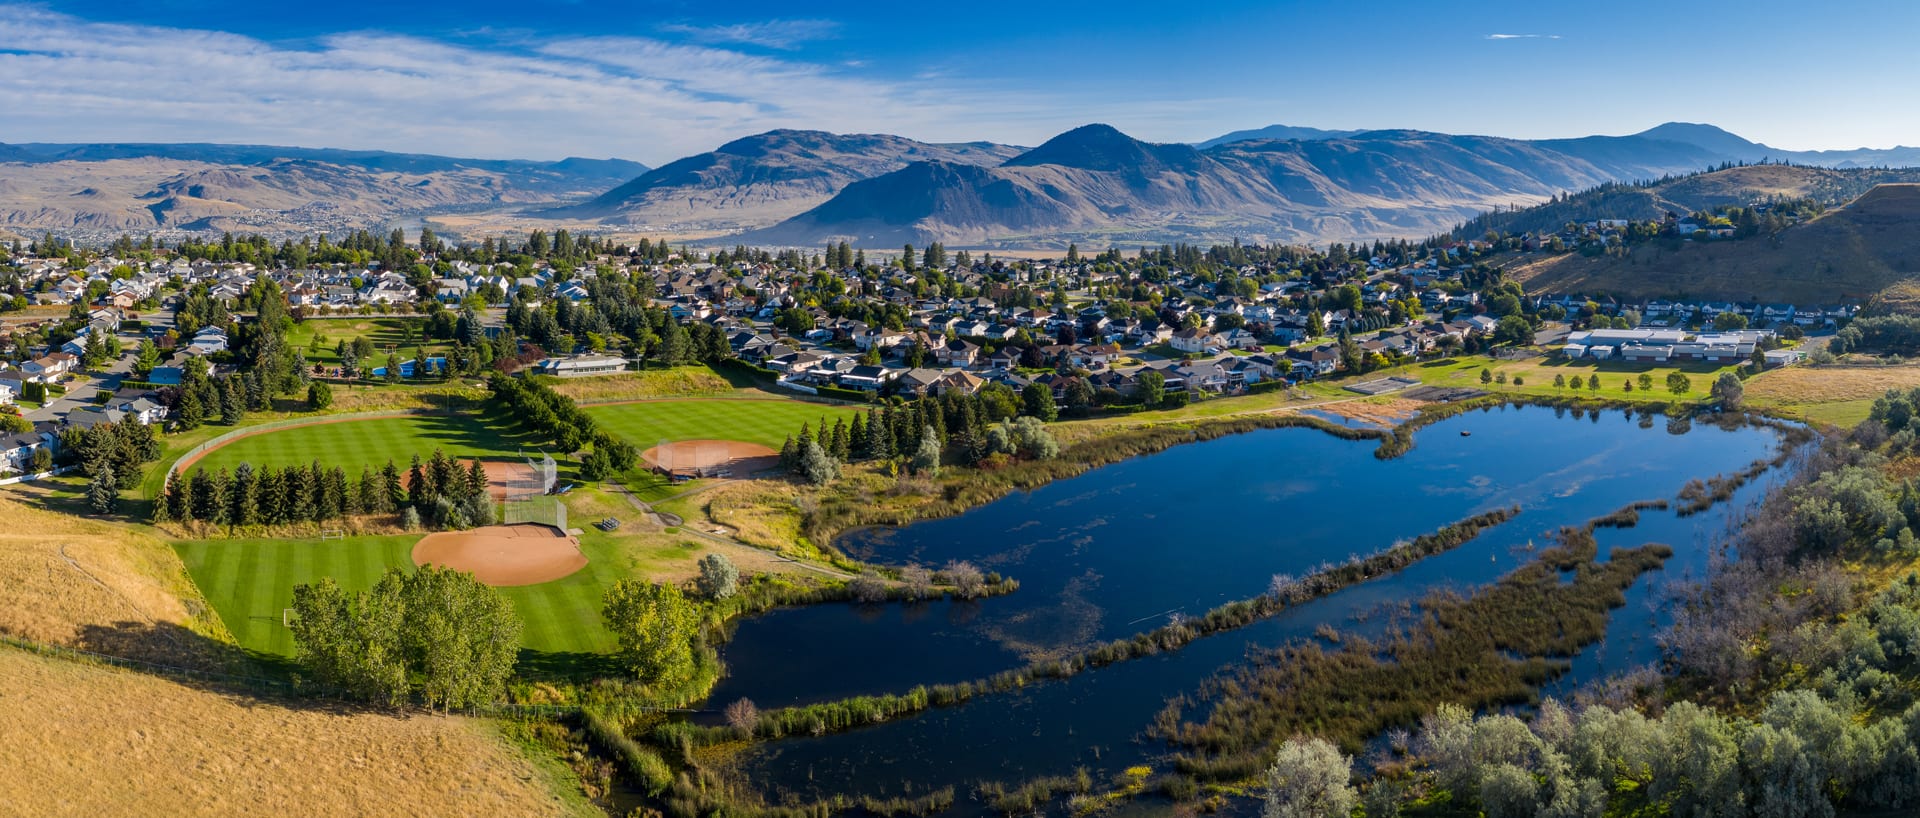 Kamloops City Aerial HDR panoramic view out mountains and rivers with lawn